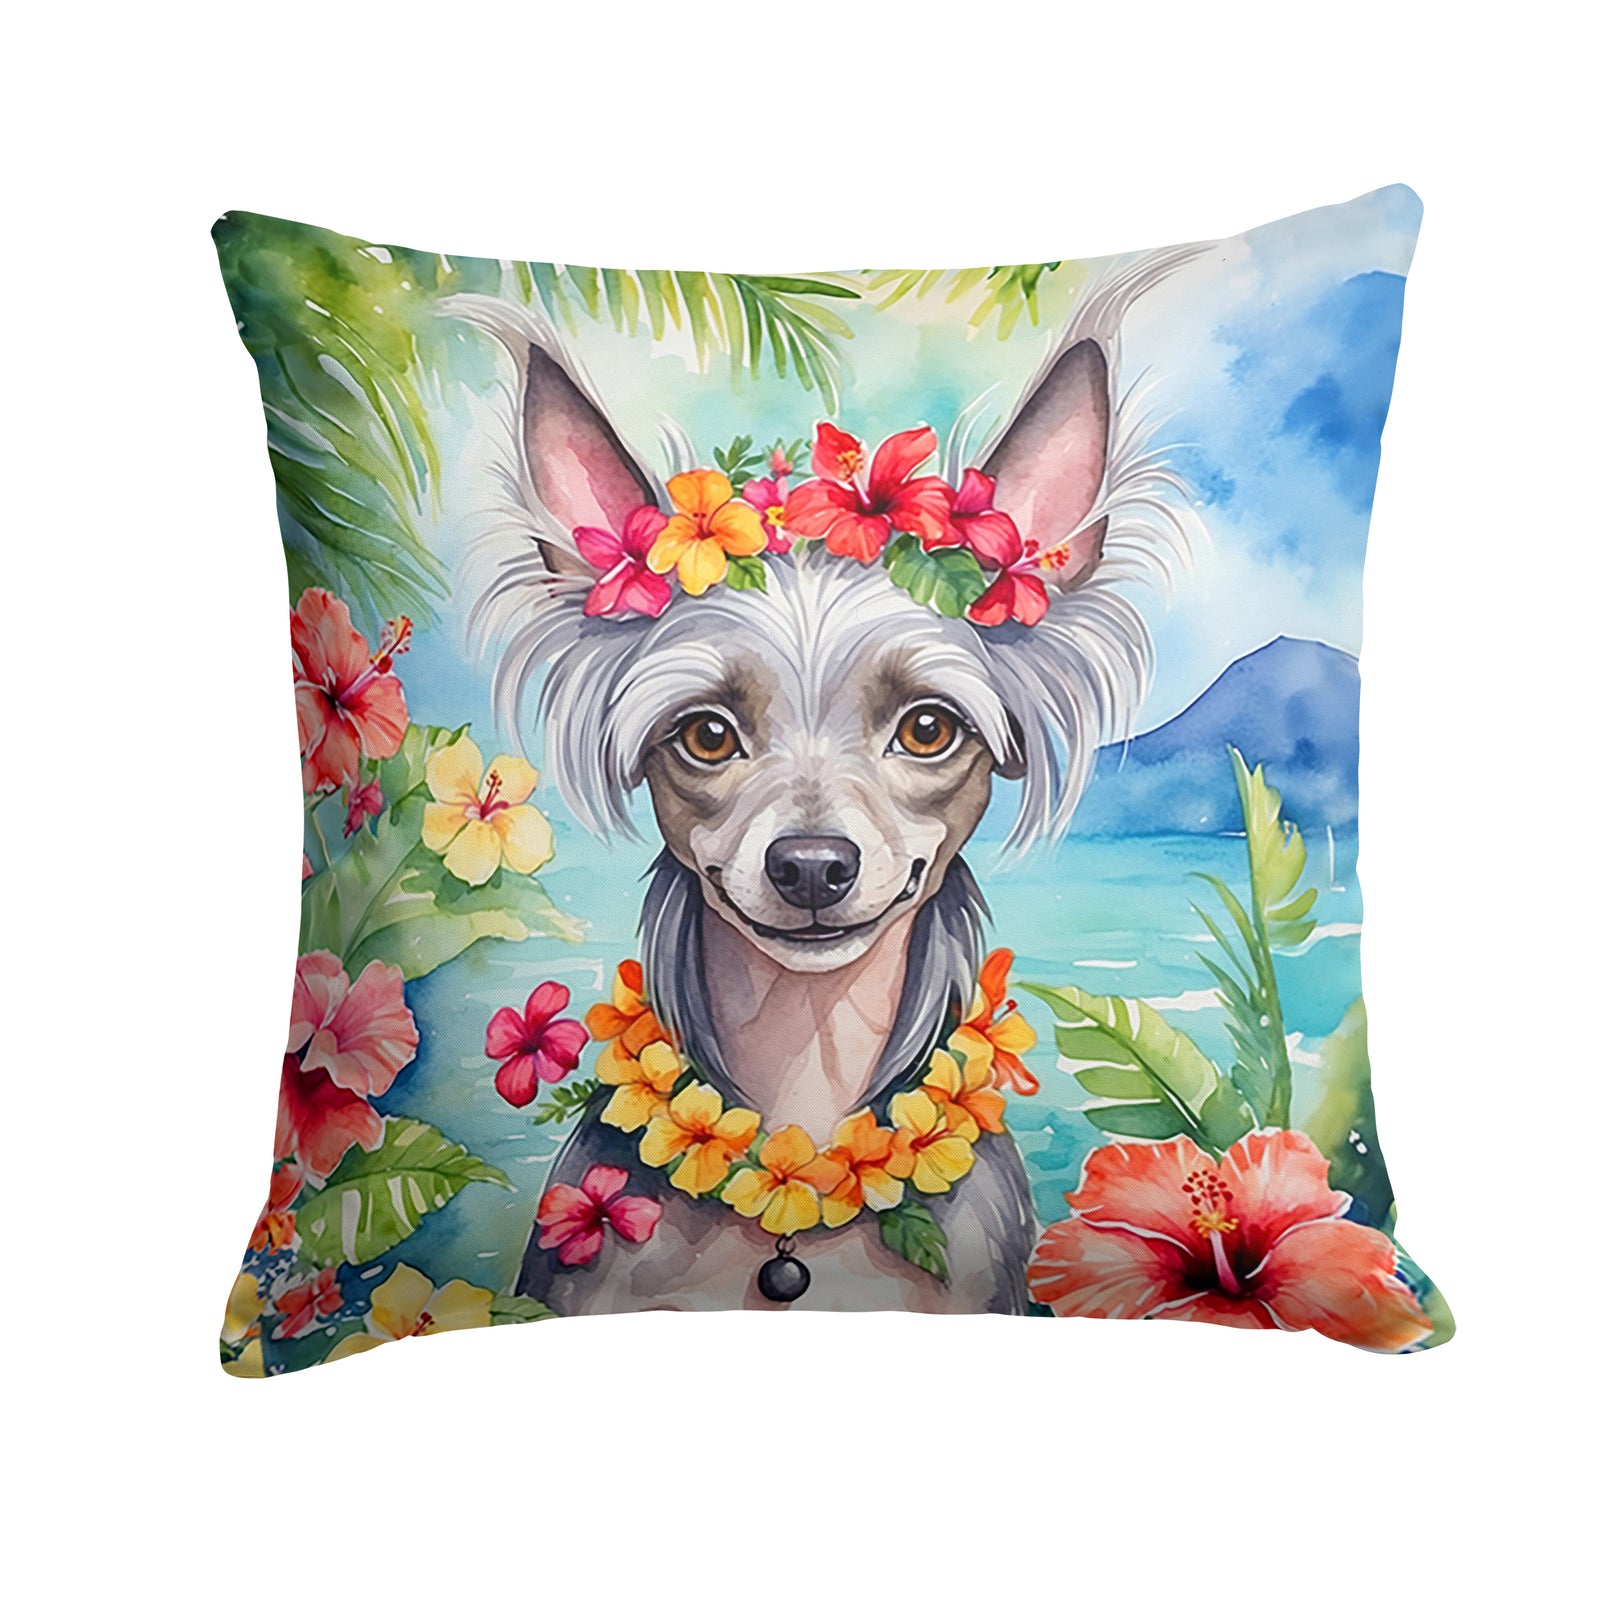 Buy this Chinese Crested Luau Throw Pillow